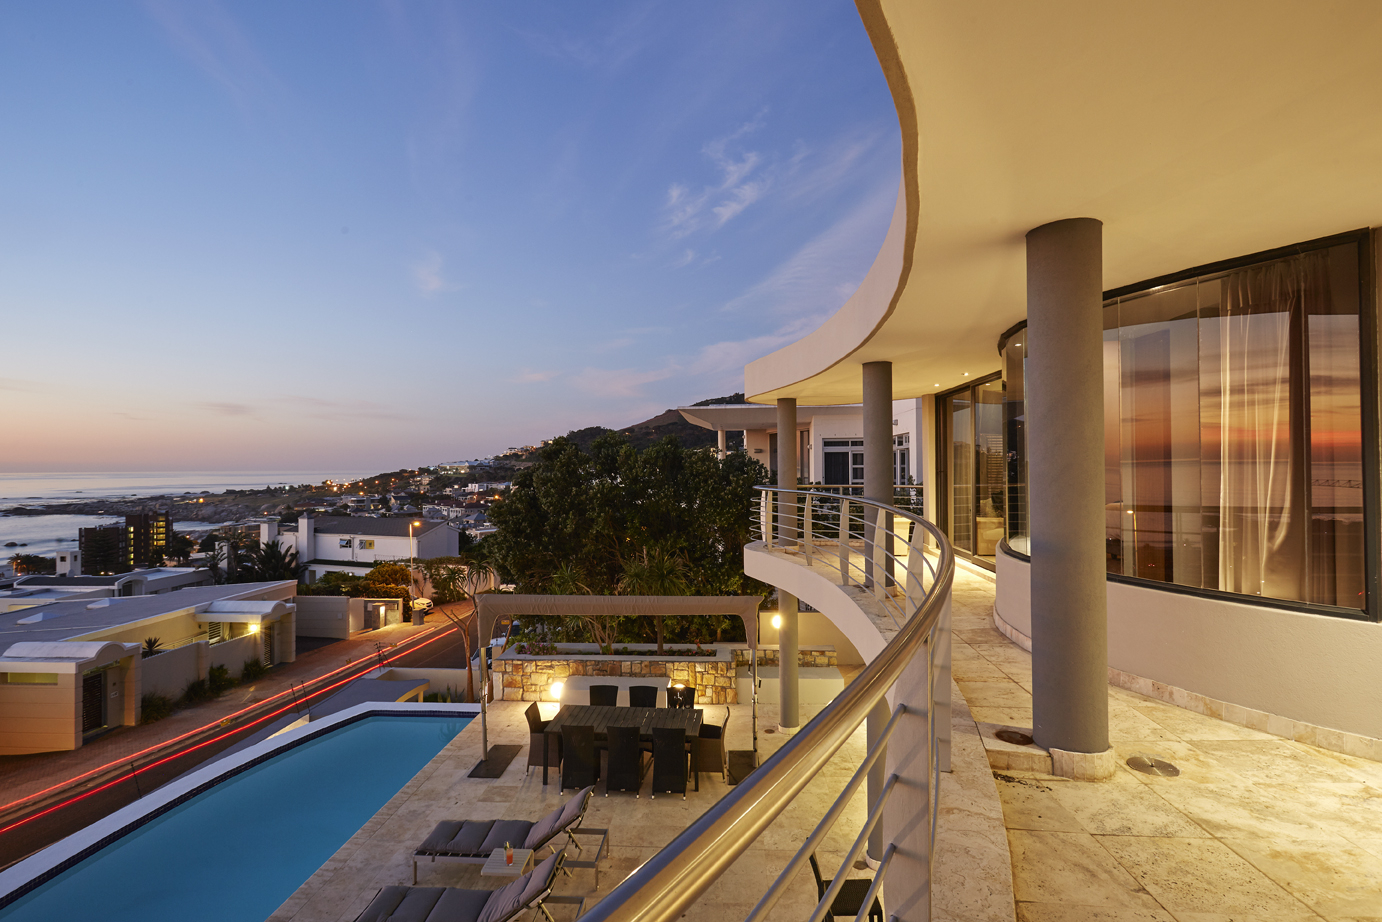 Photo 25 of Villa Waves accommodation in Camps Bay, Cape Town with 4 bedrooms and 4 bathrooms